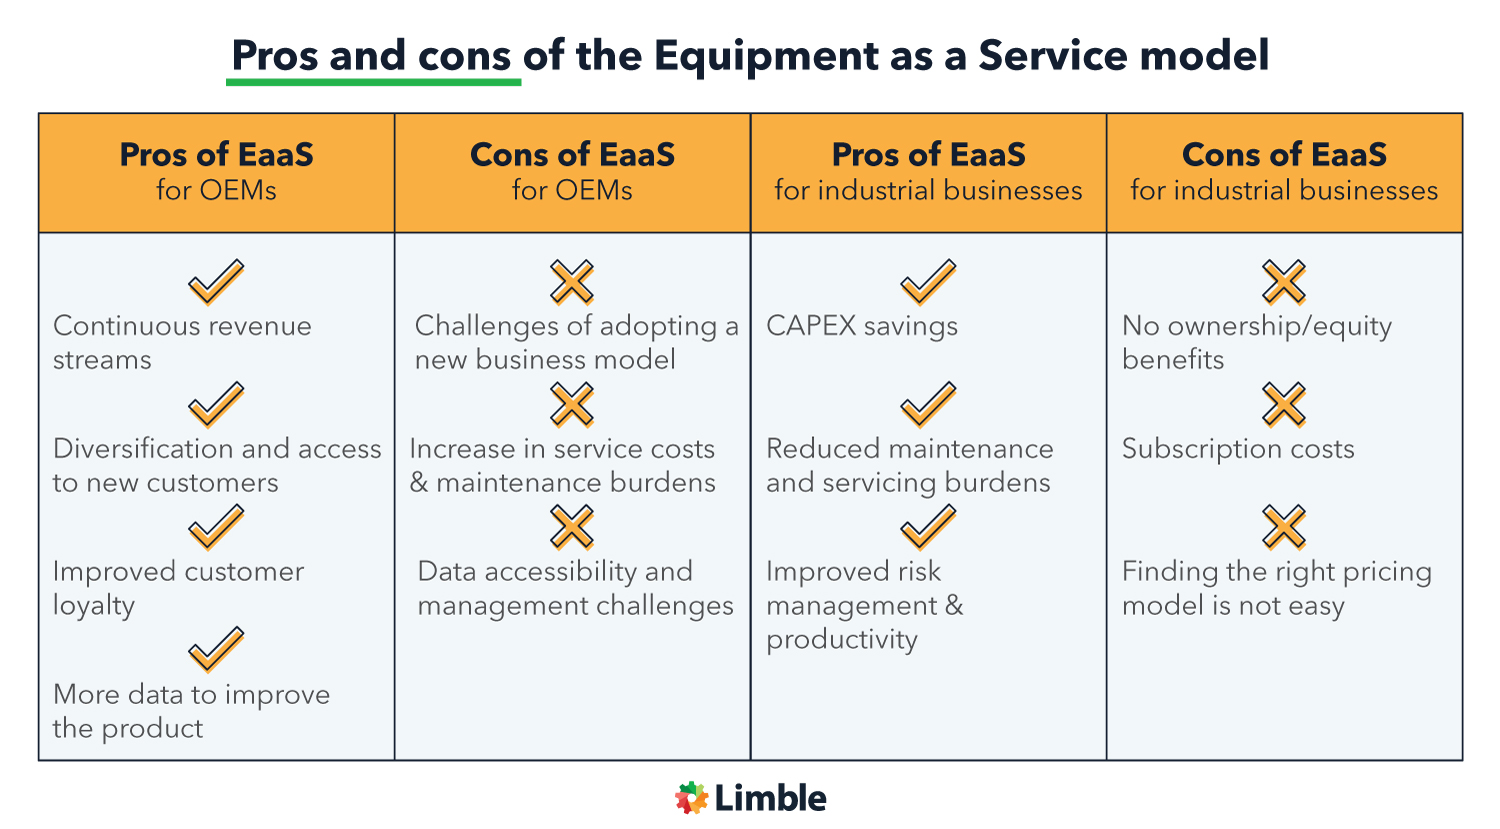 Pros and cons of the Equipment as a Service model